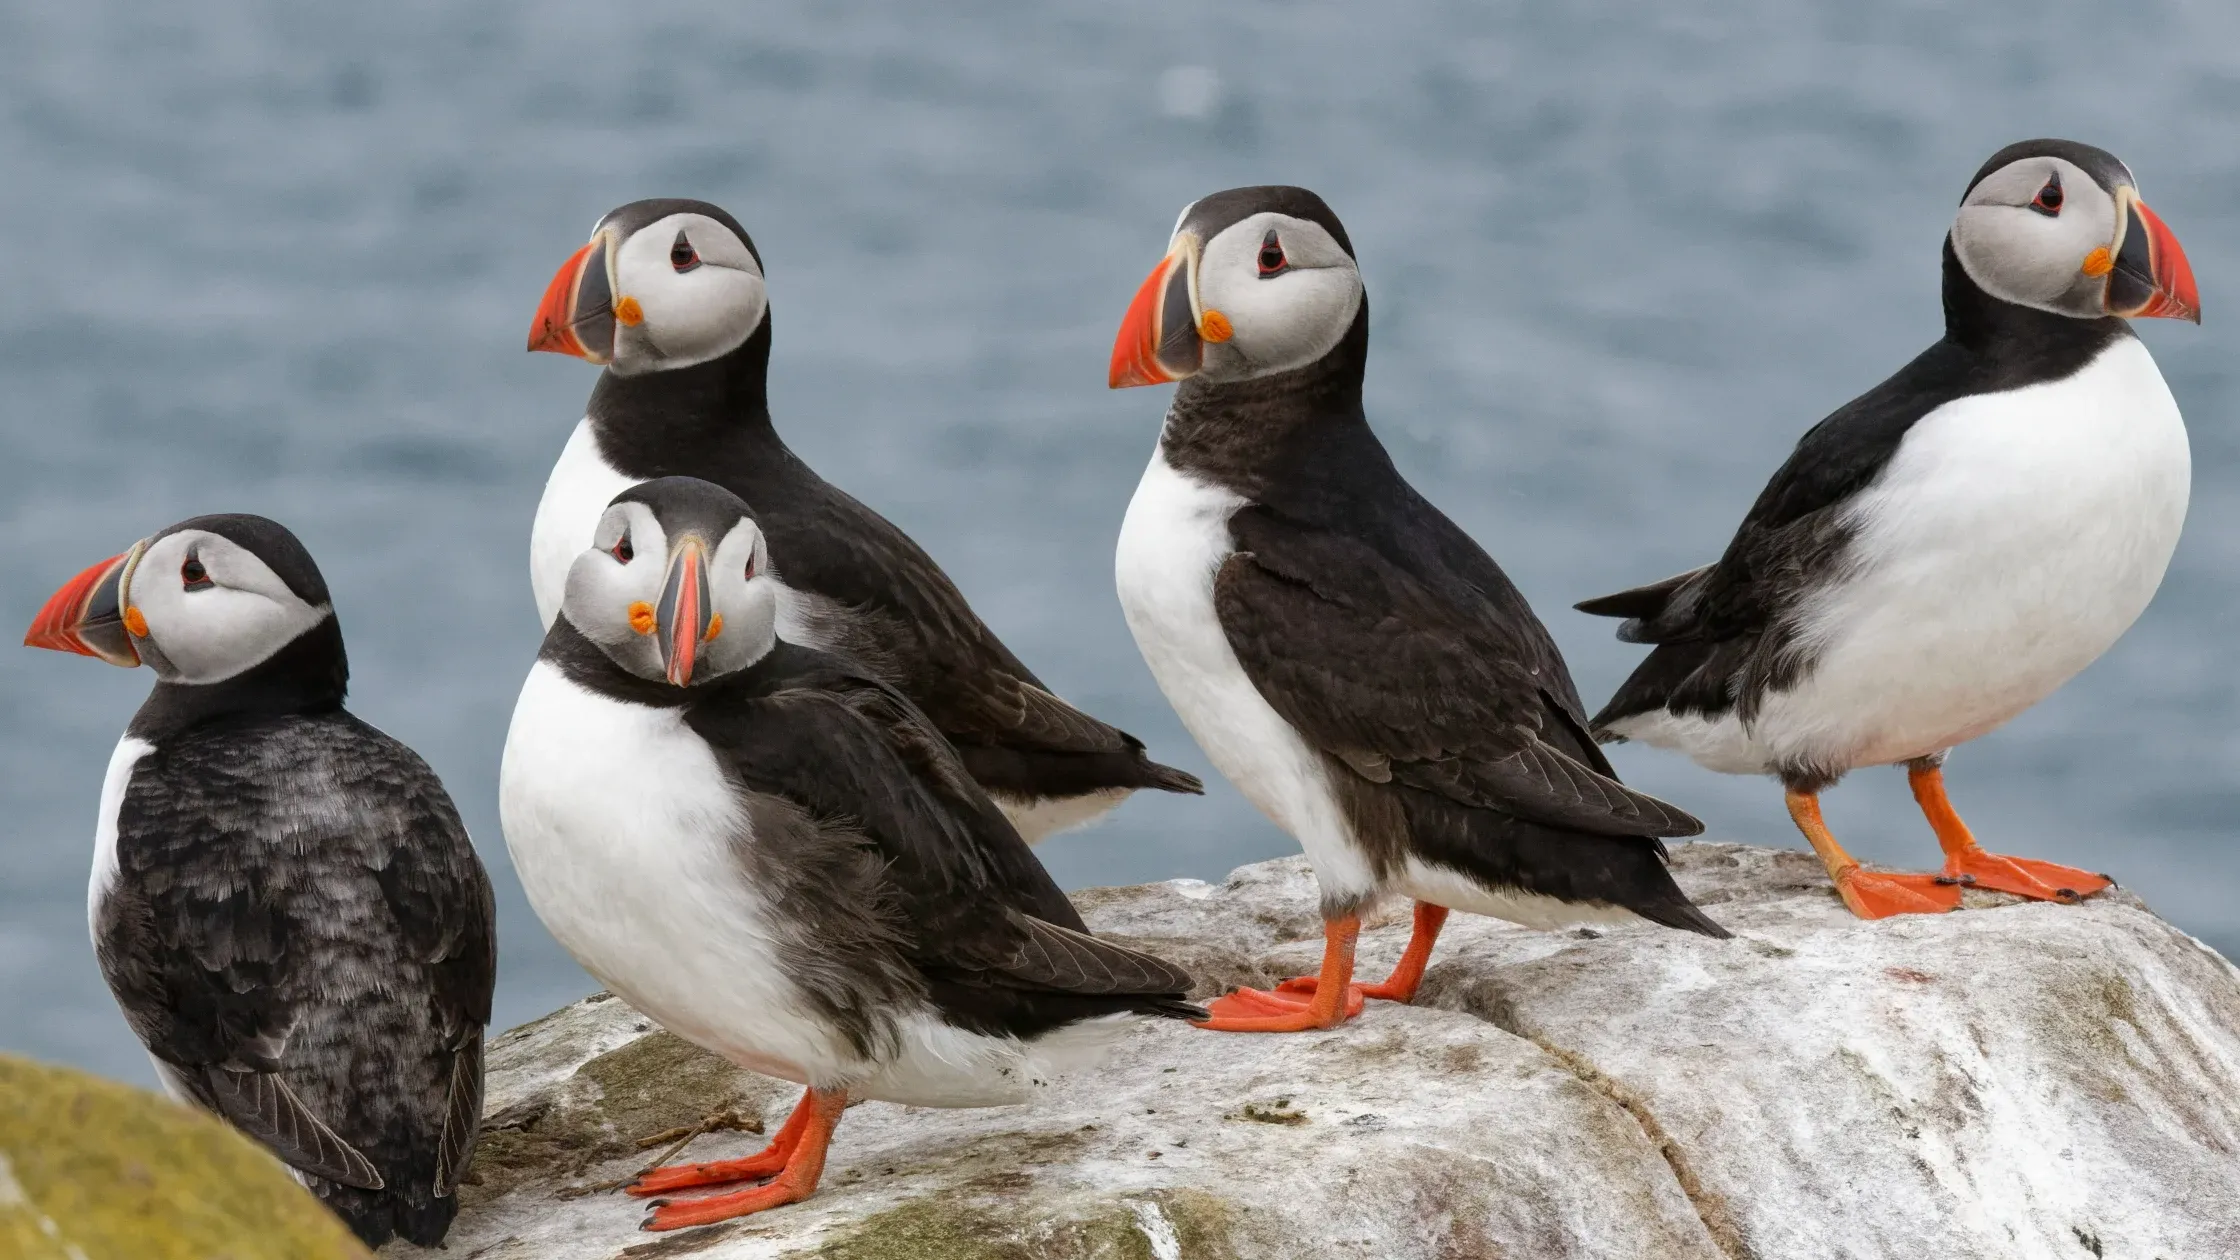 Meet Project Puffin's Seal Island Team!